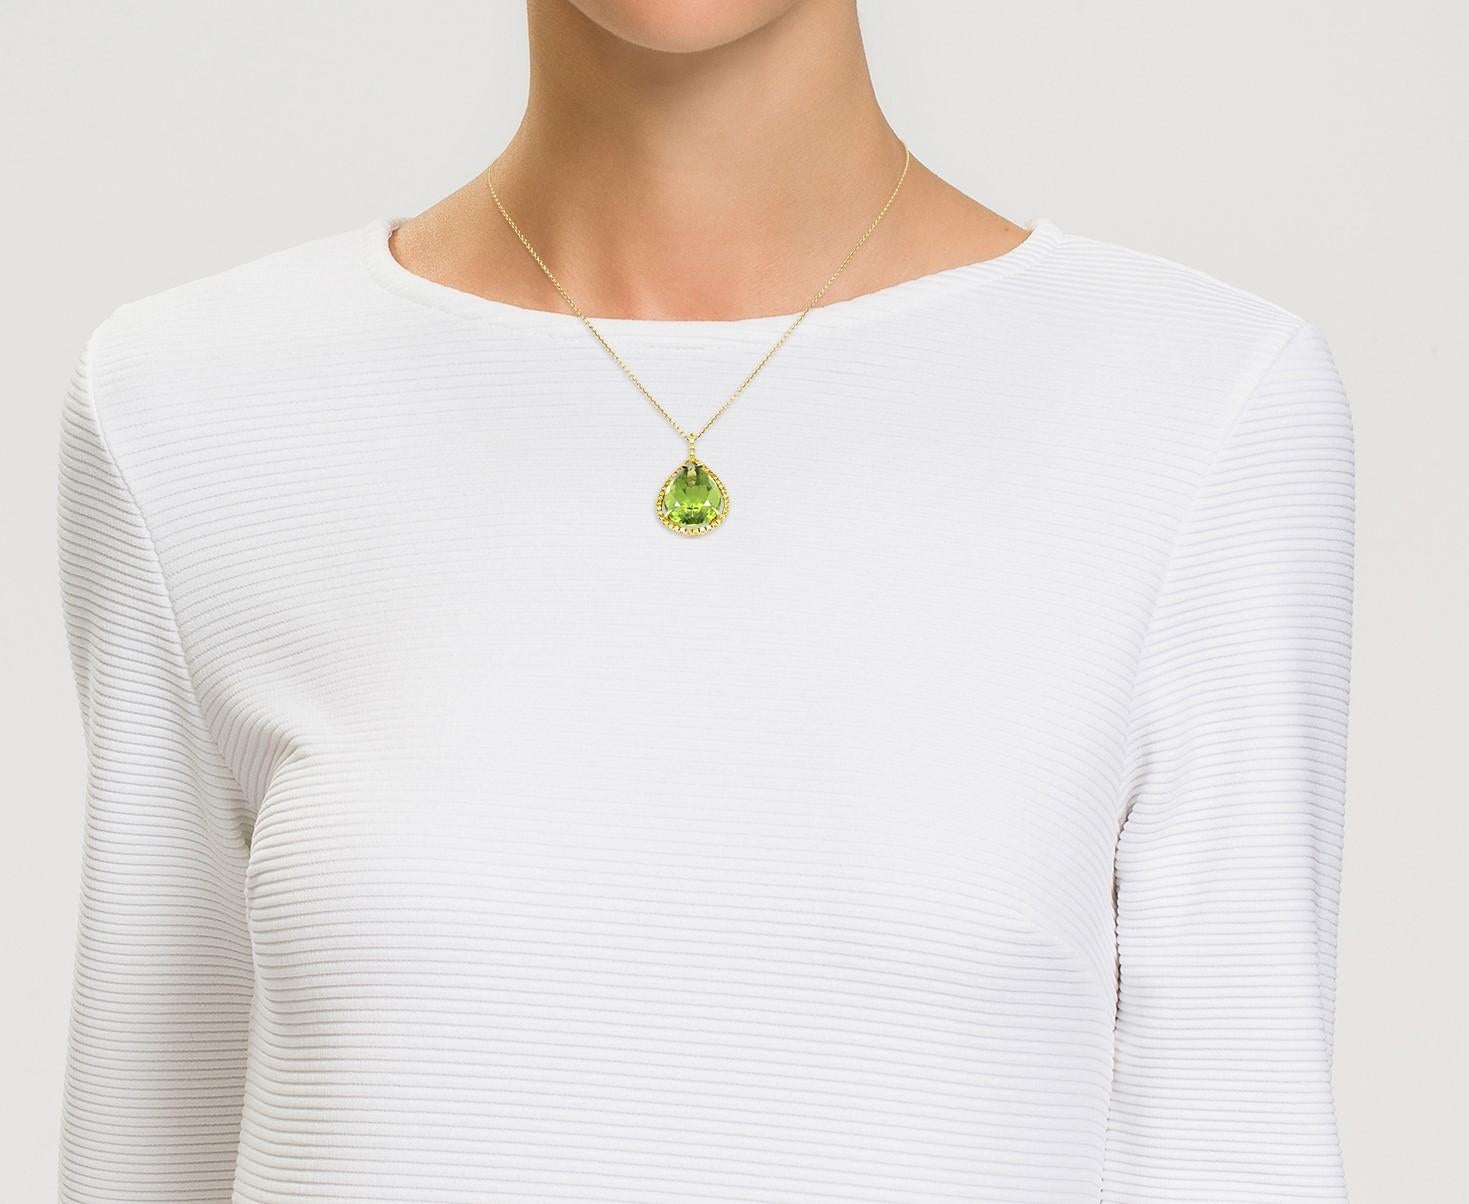 With its wondrous colour, contemporary design and craftsmanship, this peridot pendant necklace from David Morris brings together all of the House’s hallmarks. The stunning, vibrant olive-green peridot drop is suspended within a yellow gold setting,